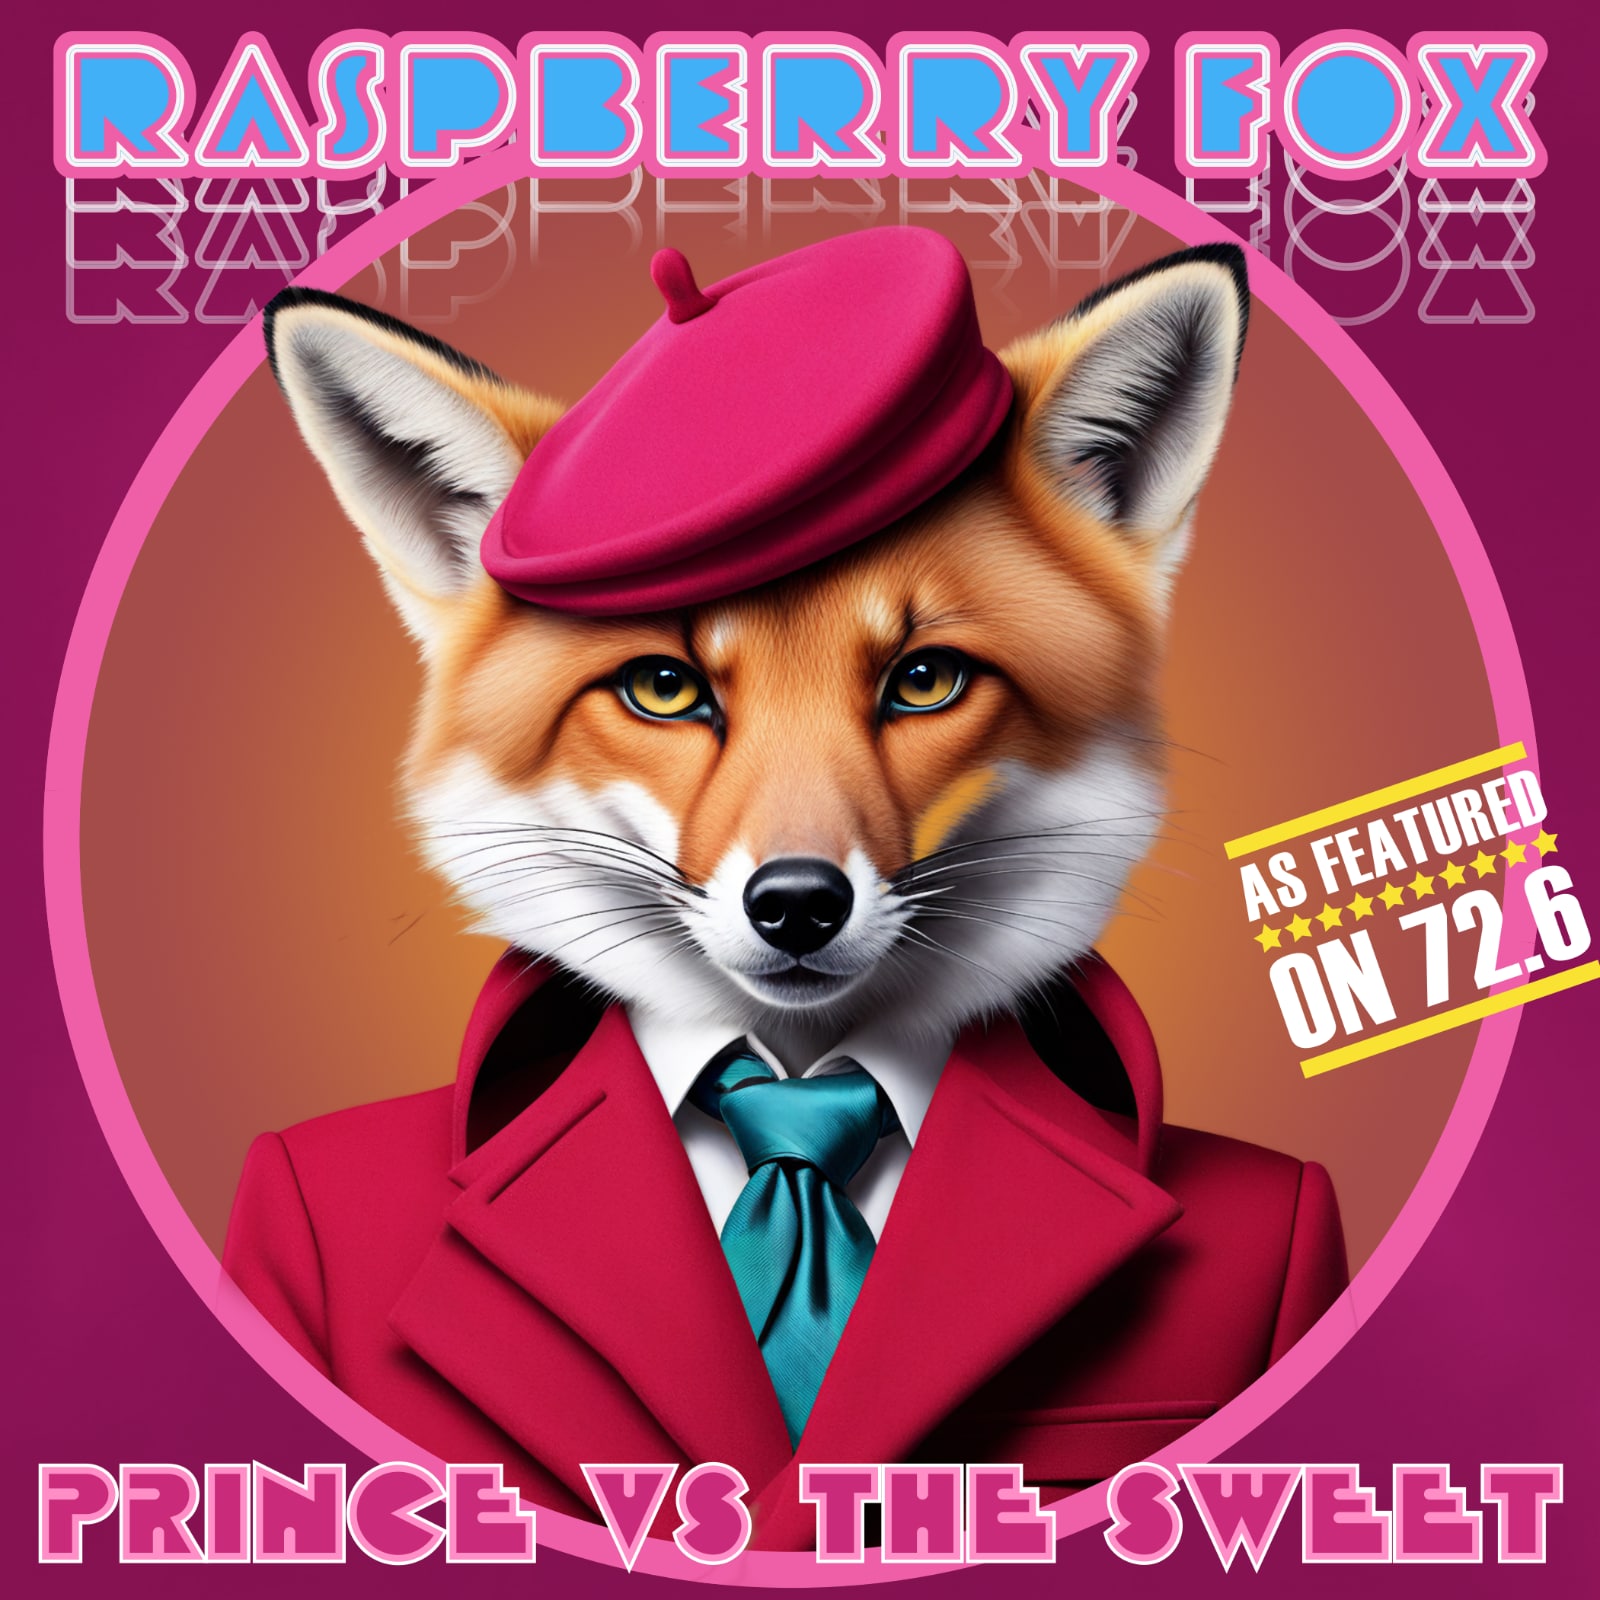 Instamatic - Raspberry Fox (Prince vs The Sweet) cover - as featured on 72.6!